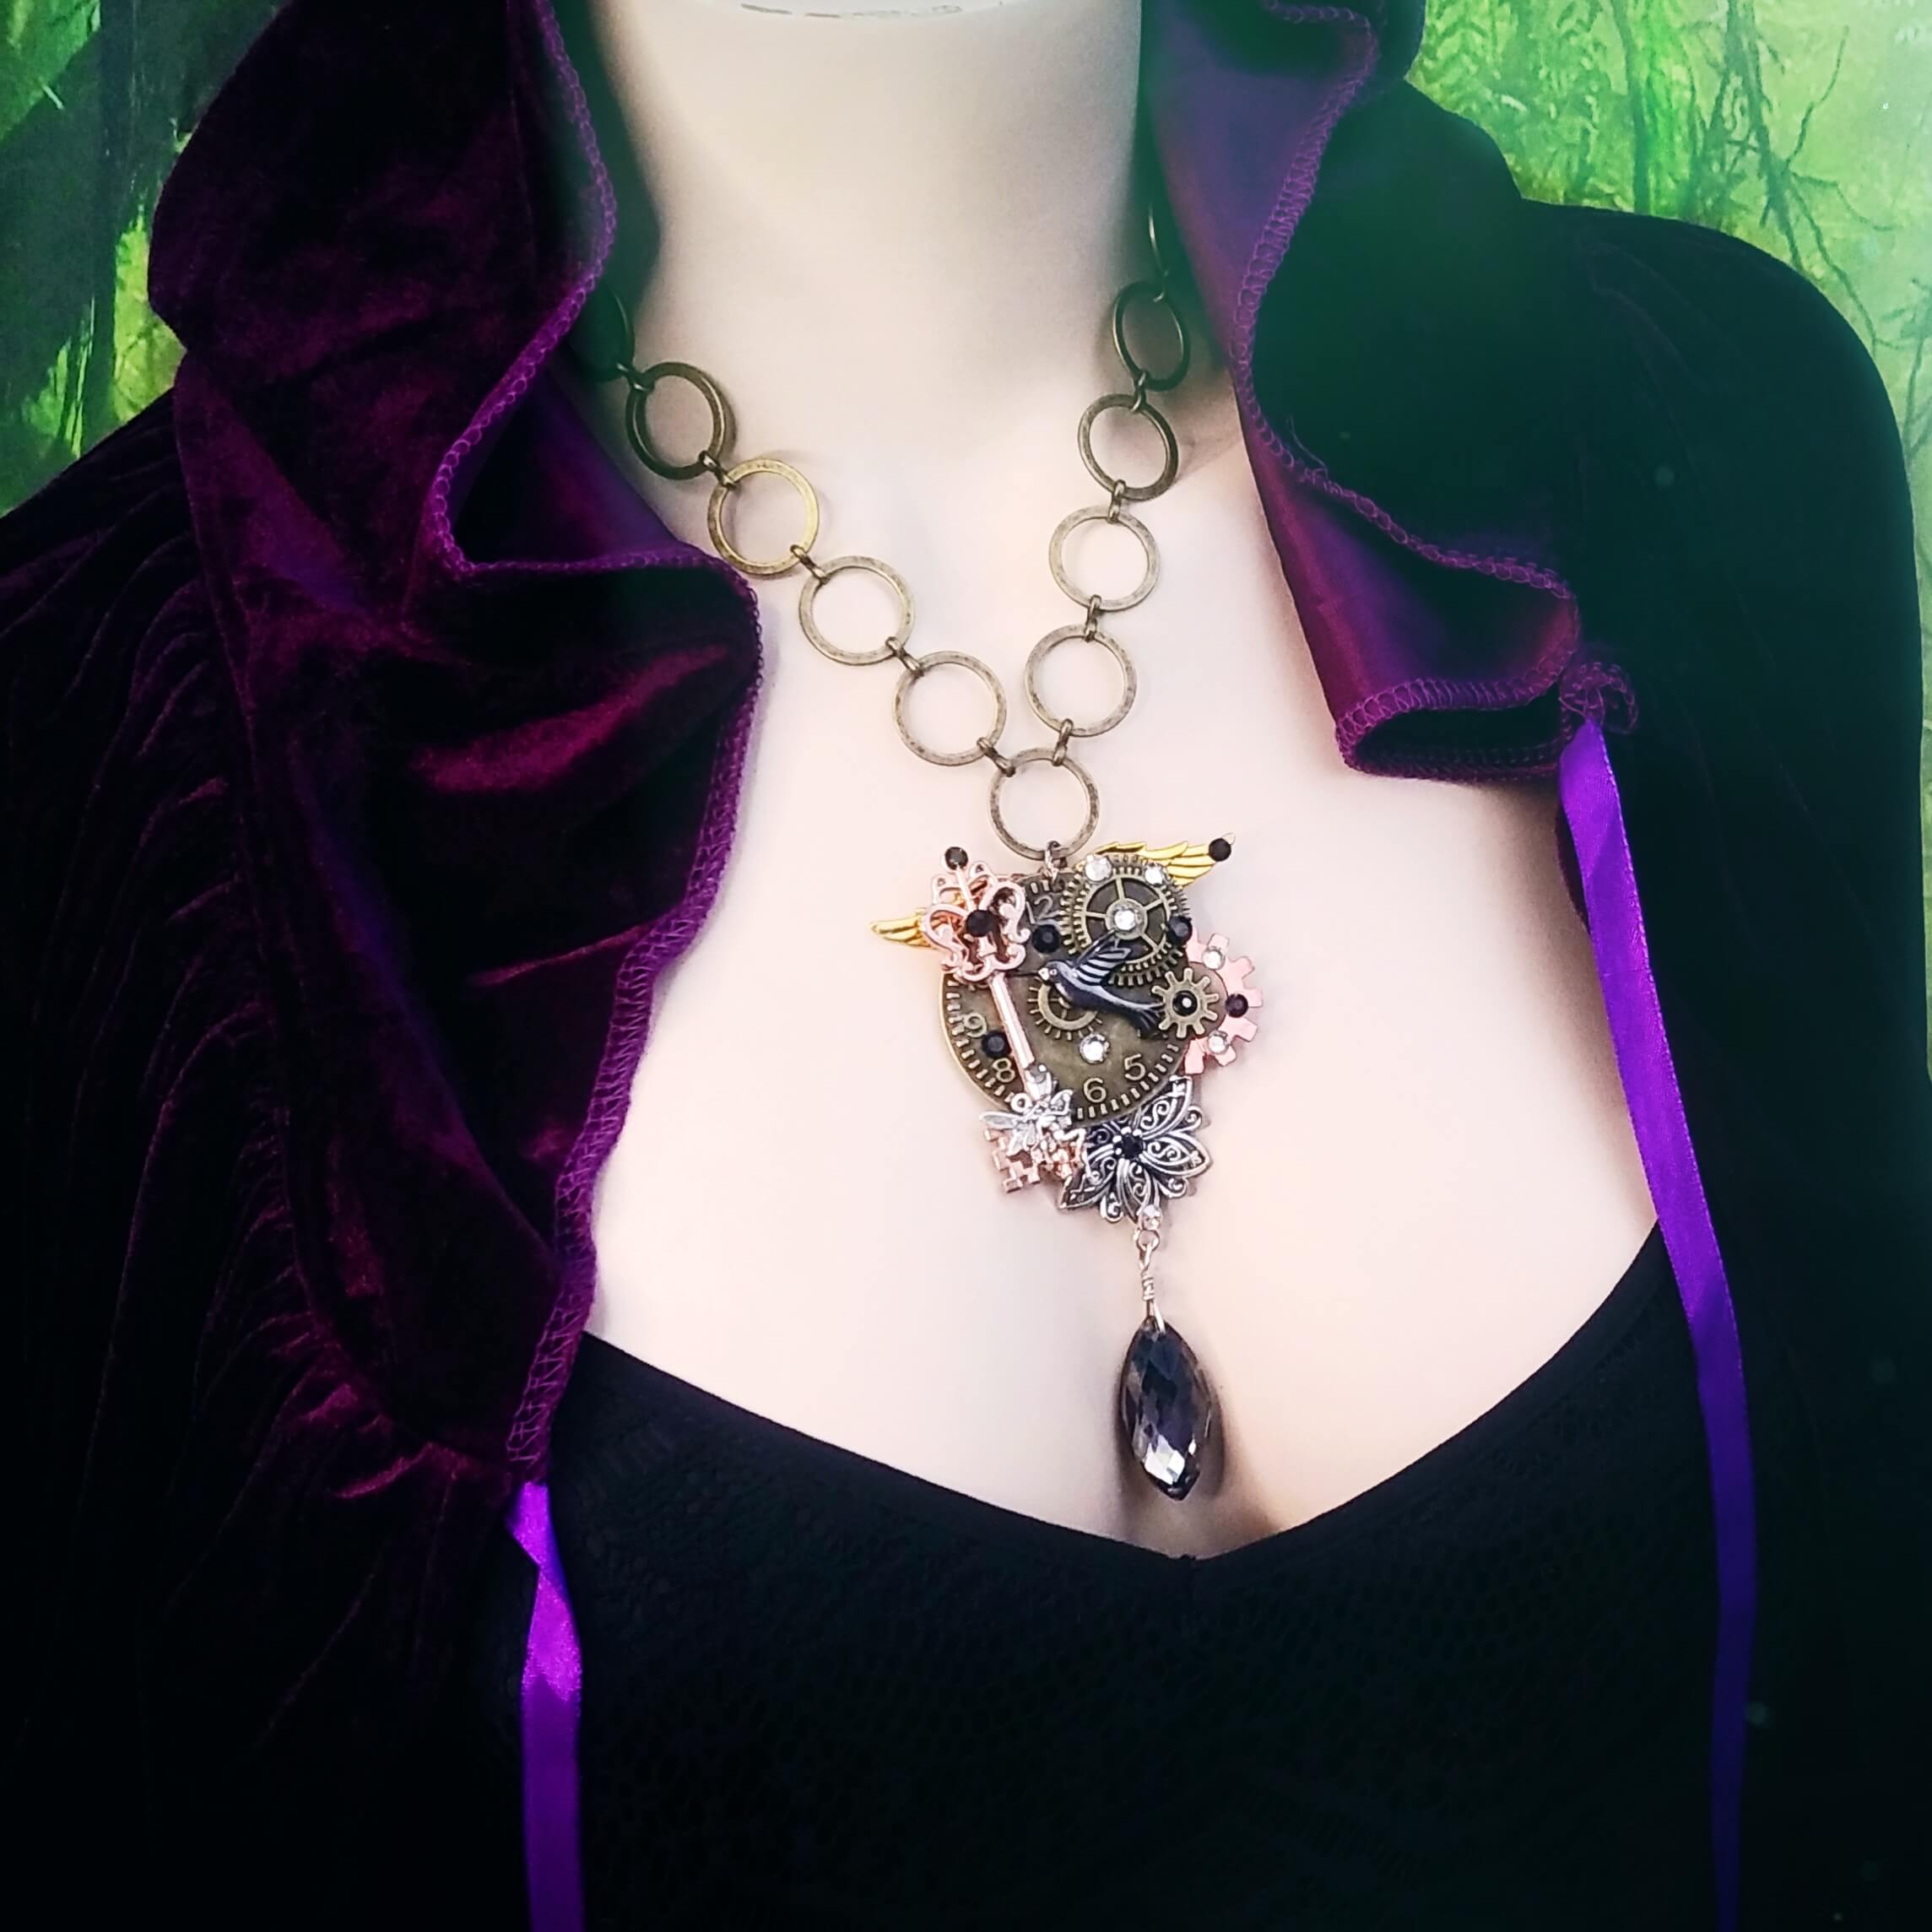 Purple Bohemian Fantasy Statement Necklace - Amethyst Beholder of Time